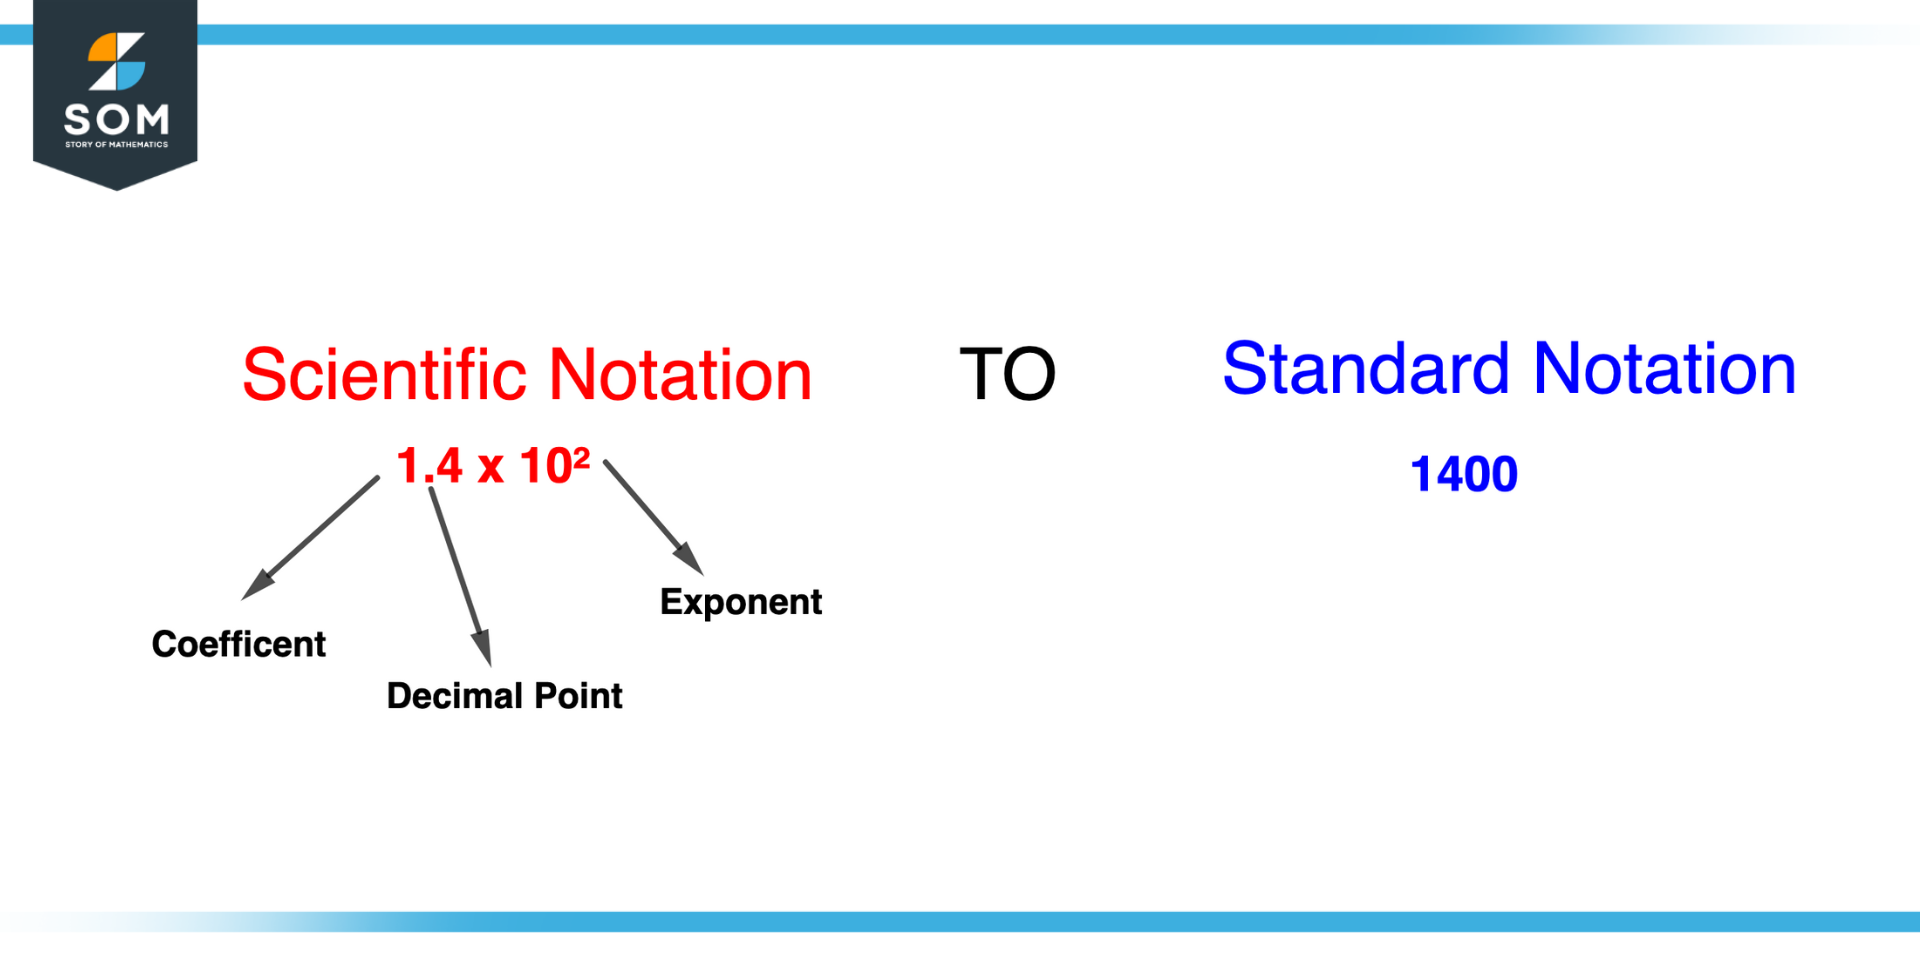 Conversion of Scientific Notation to Standard Notation